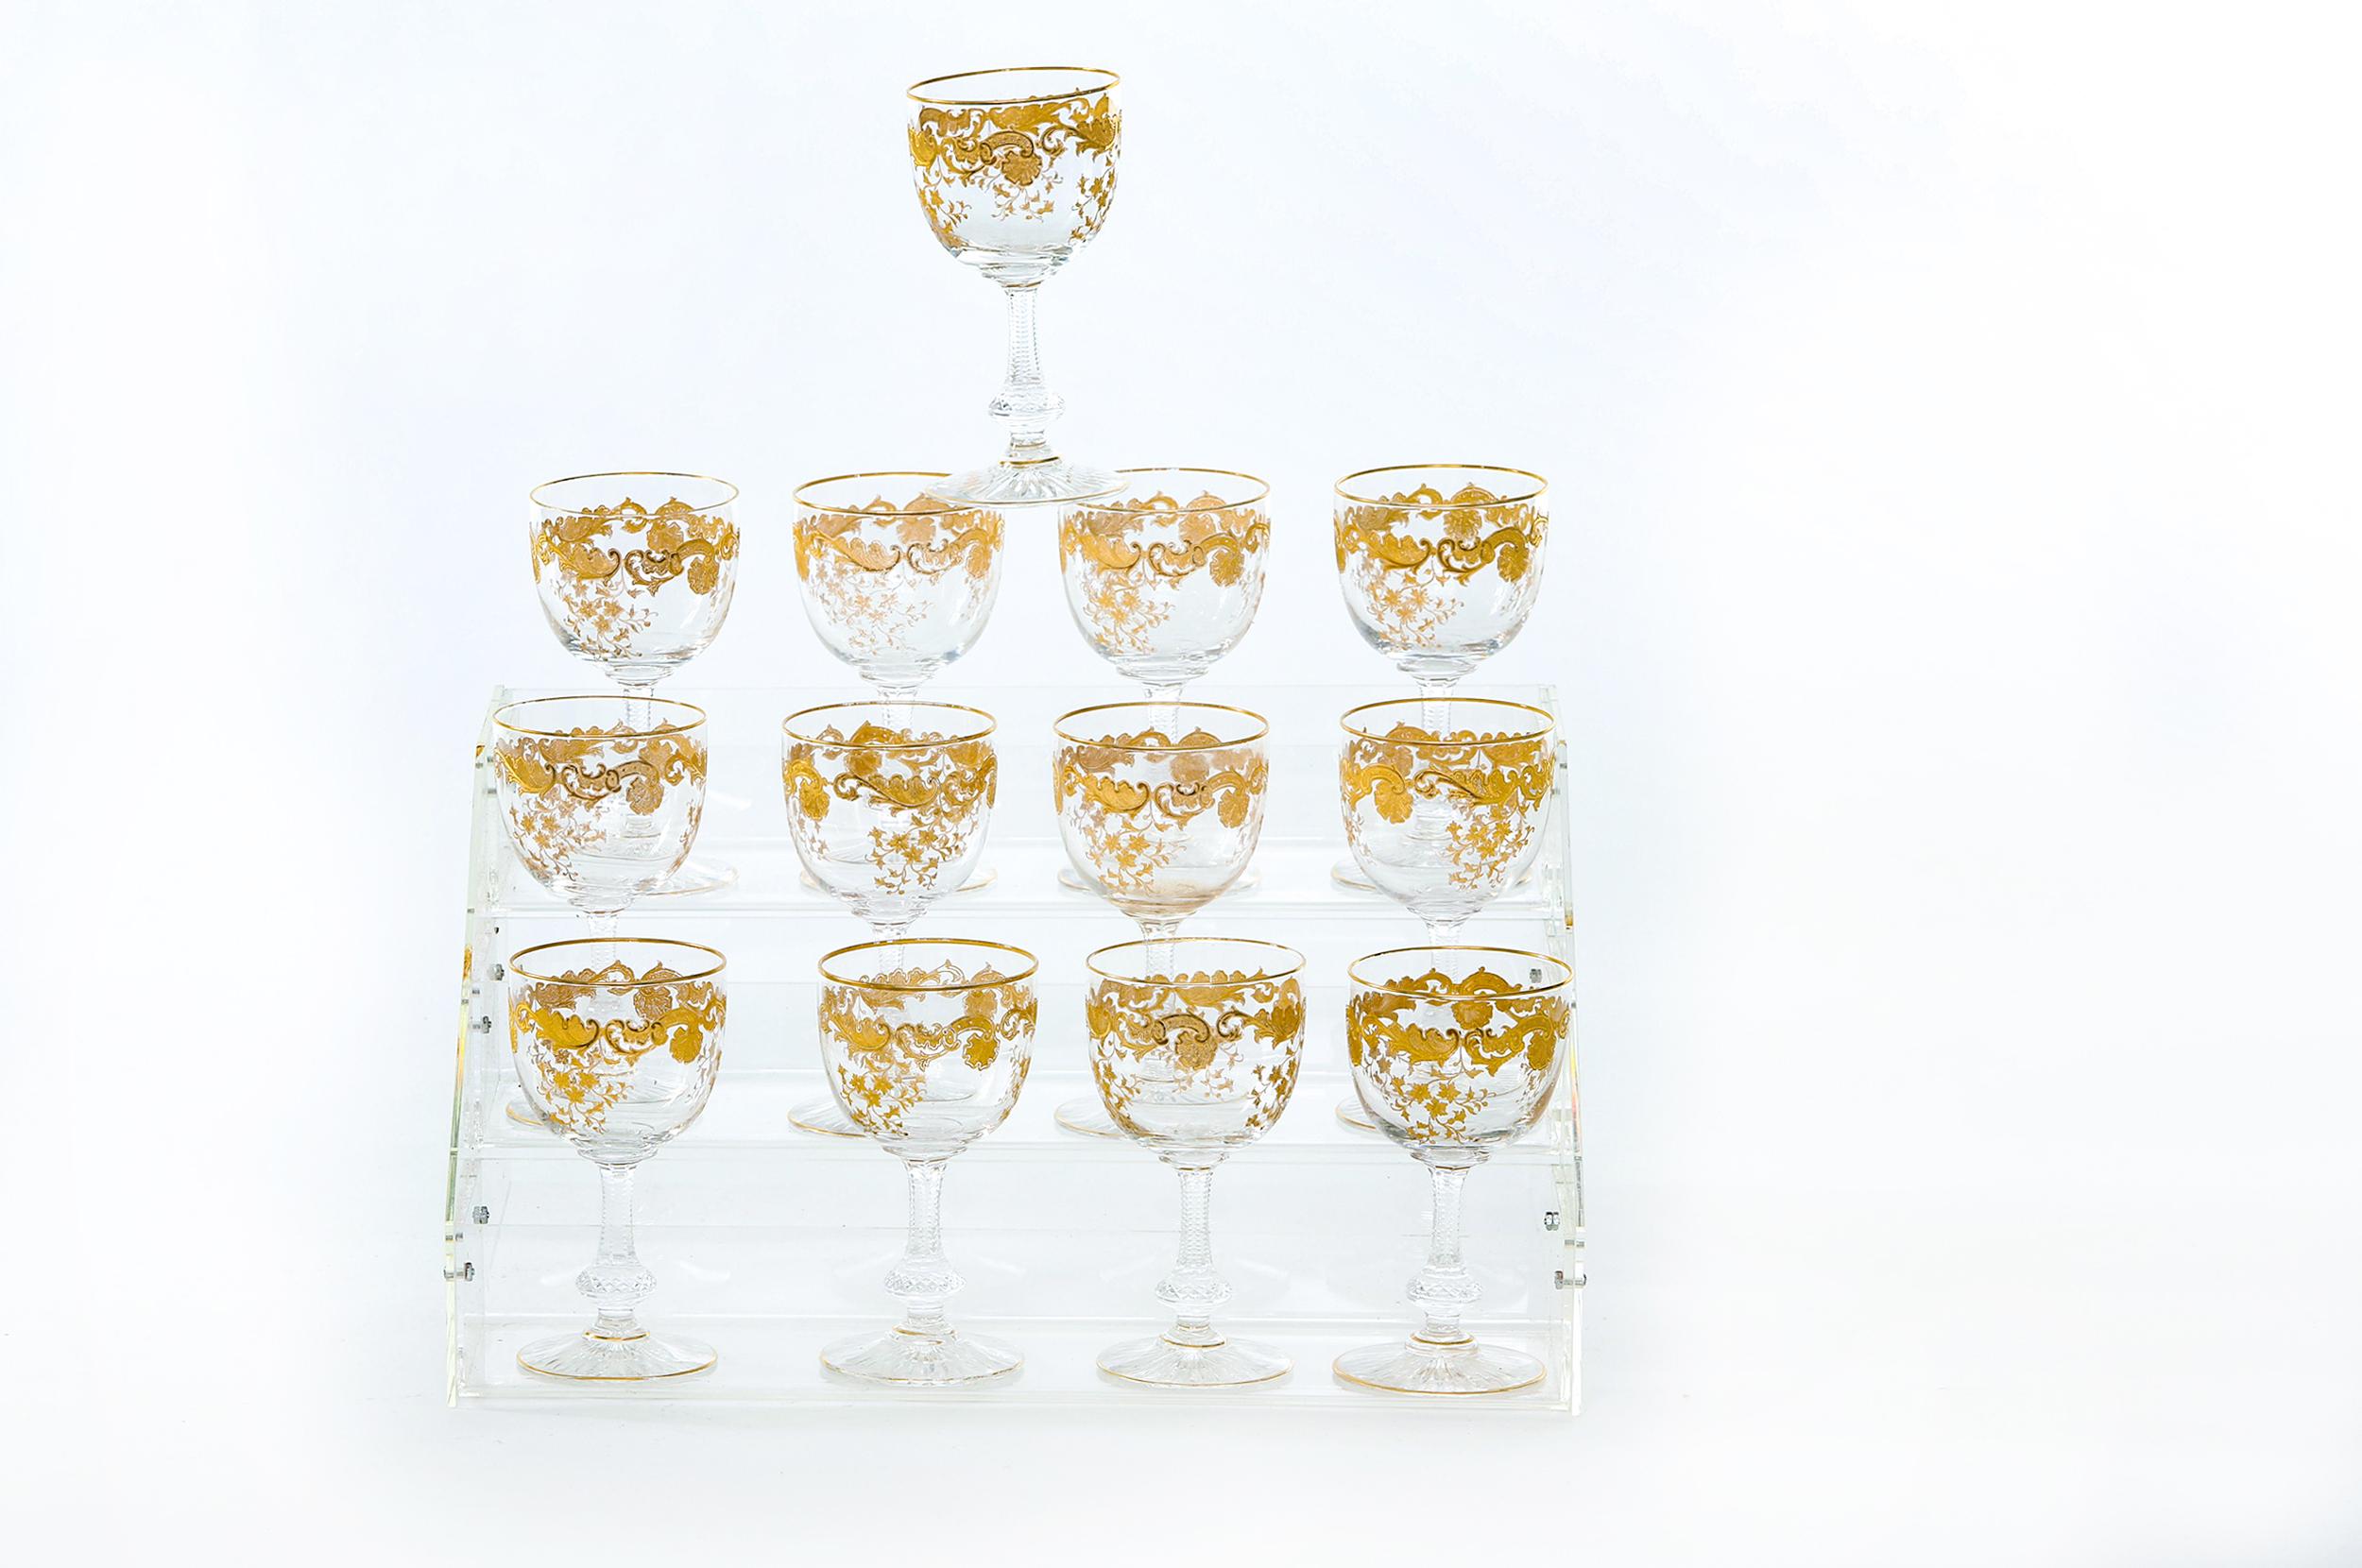 Mid-20th century Saint Louis crystal with gold design details tableware / barware wine / water service for twelve people. Each one is in great condition. Maker's mark stamped undersigned. Each one stands about 6.5 inches tall x 3 inches diameter.